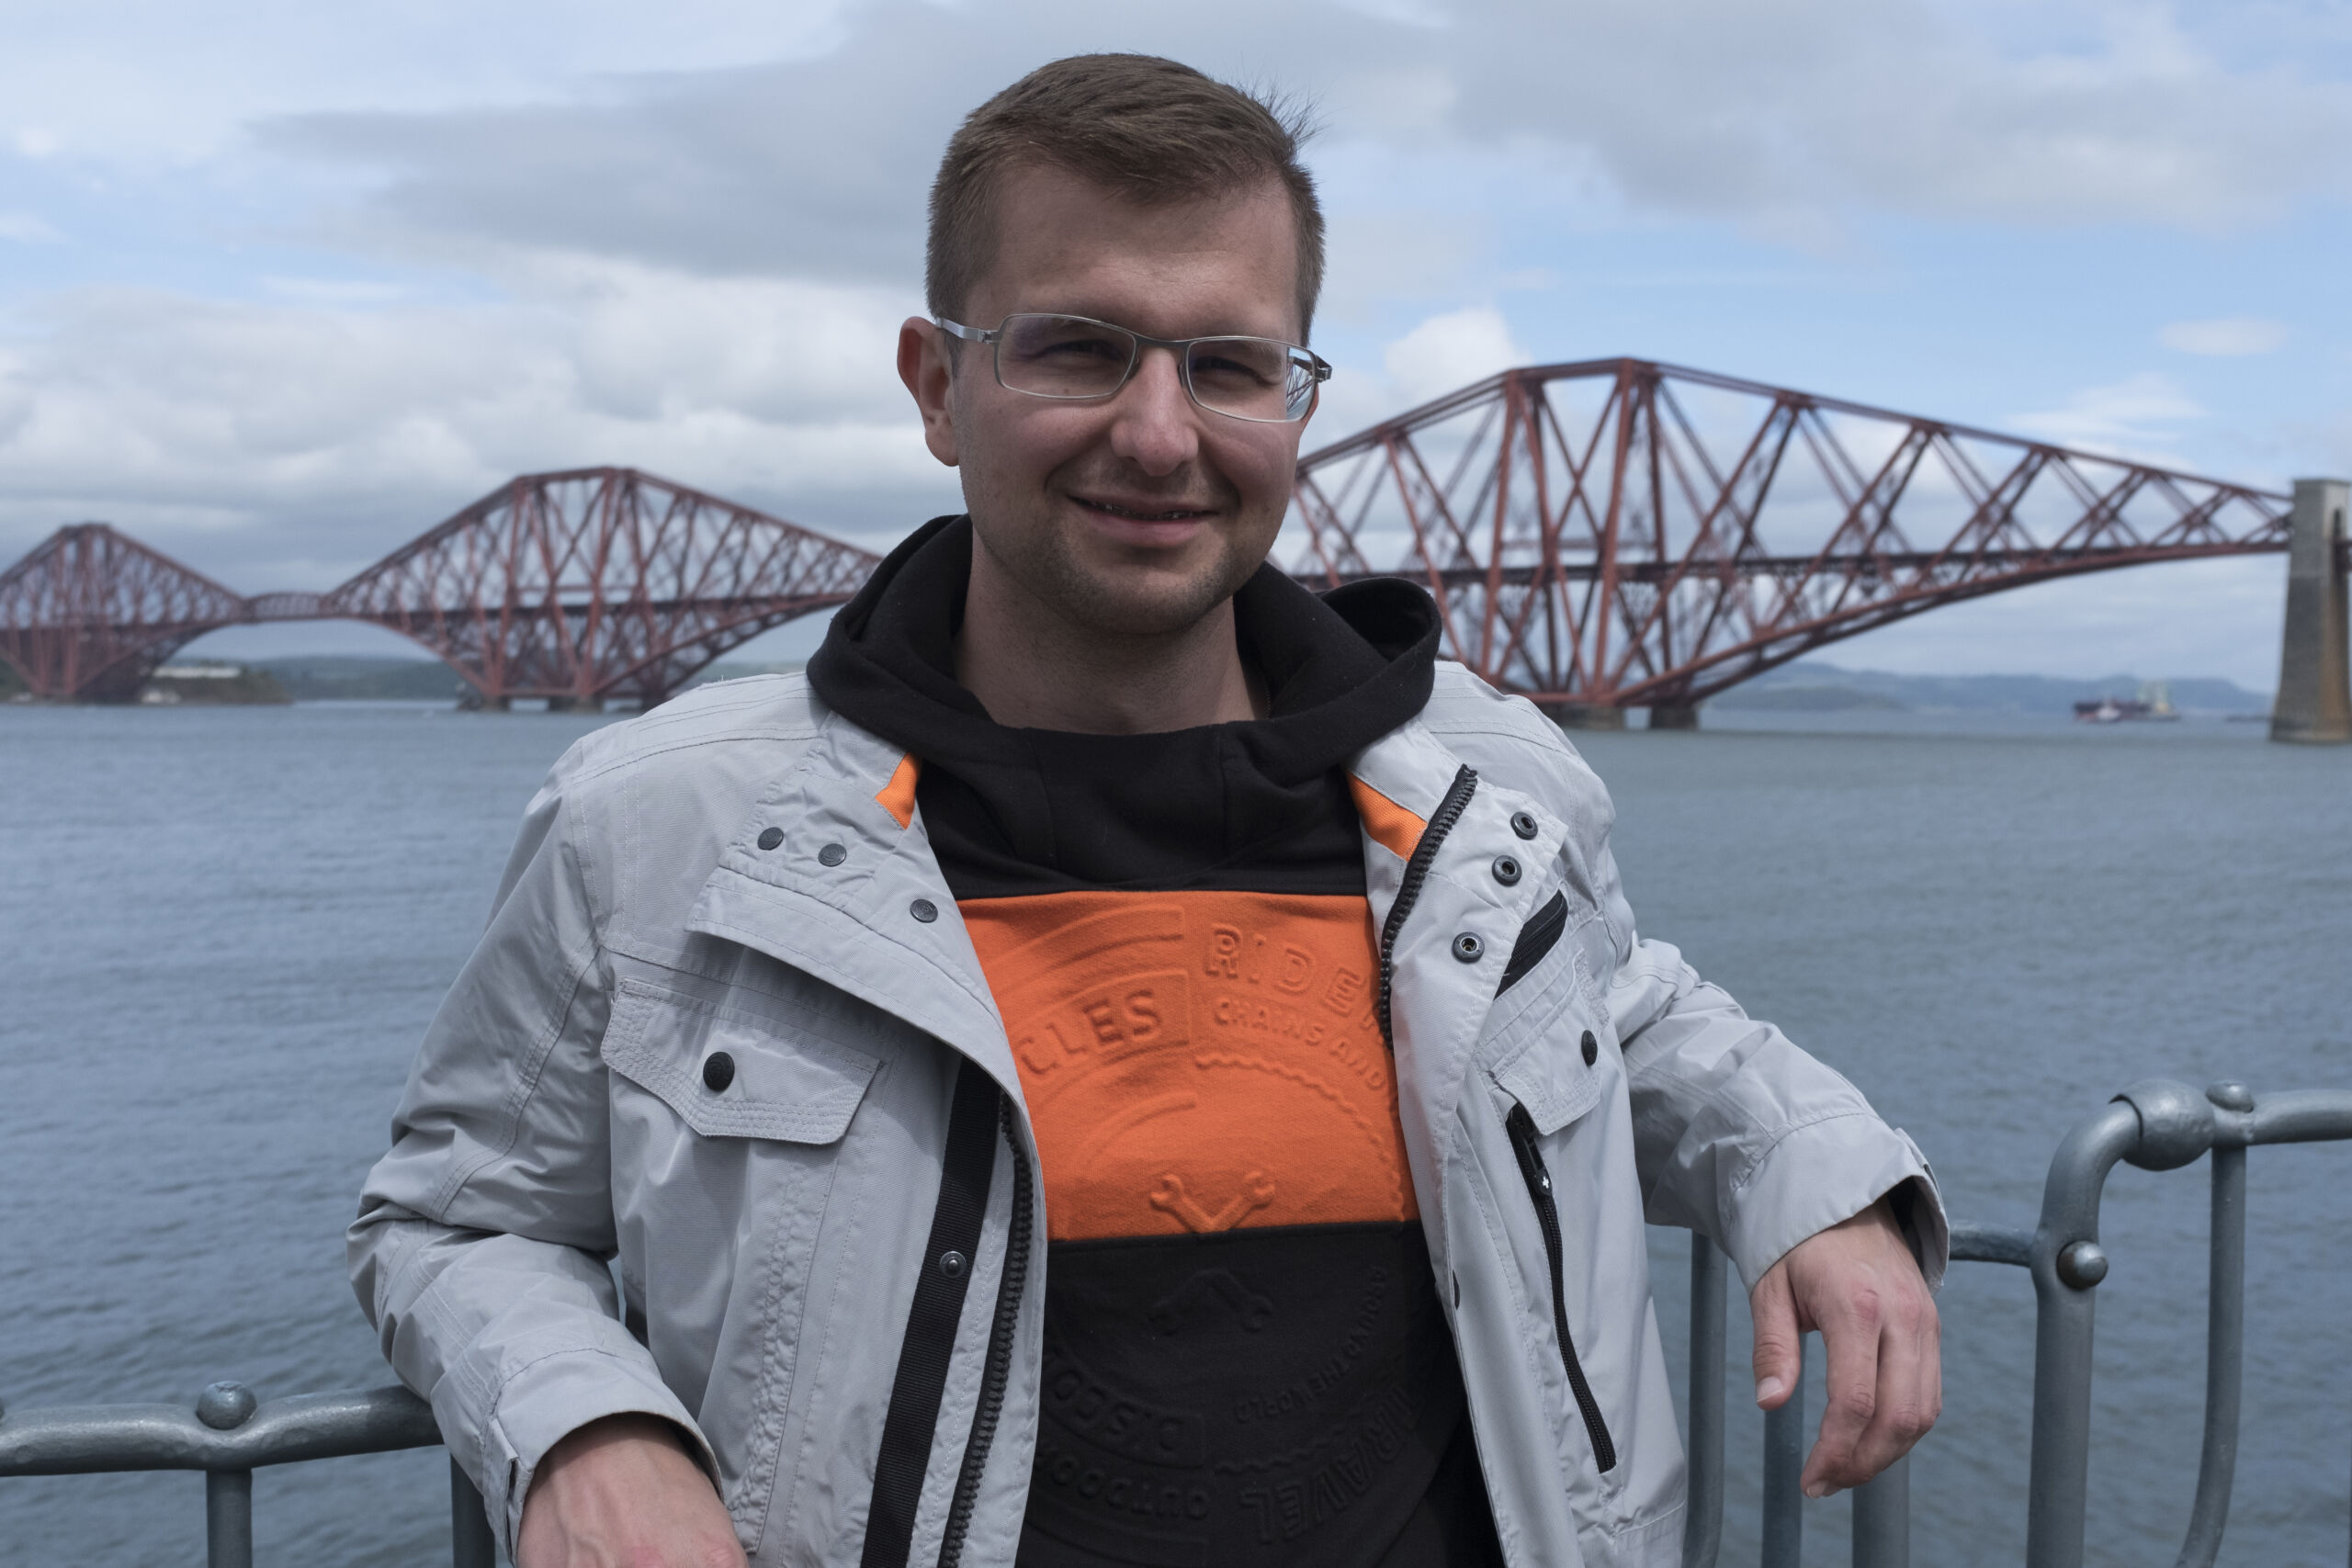 A man with glasses poses in front of the Forth Bridge